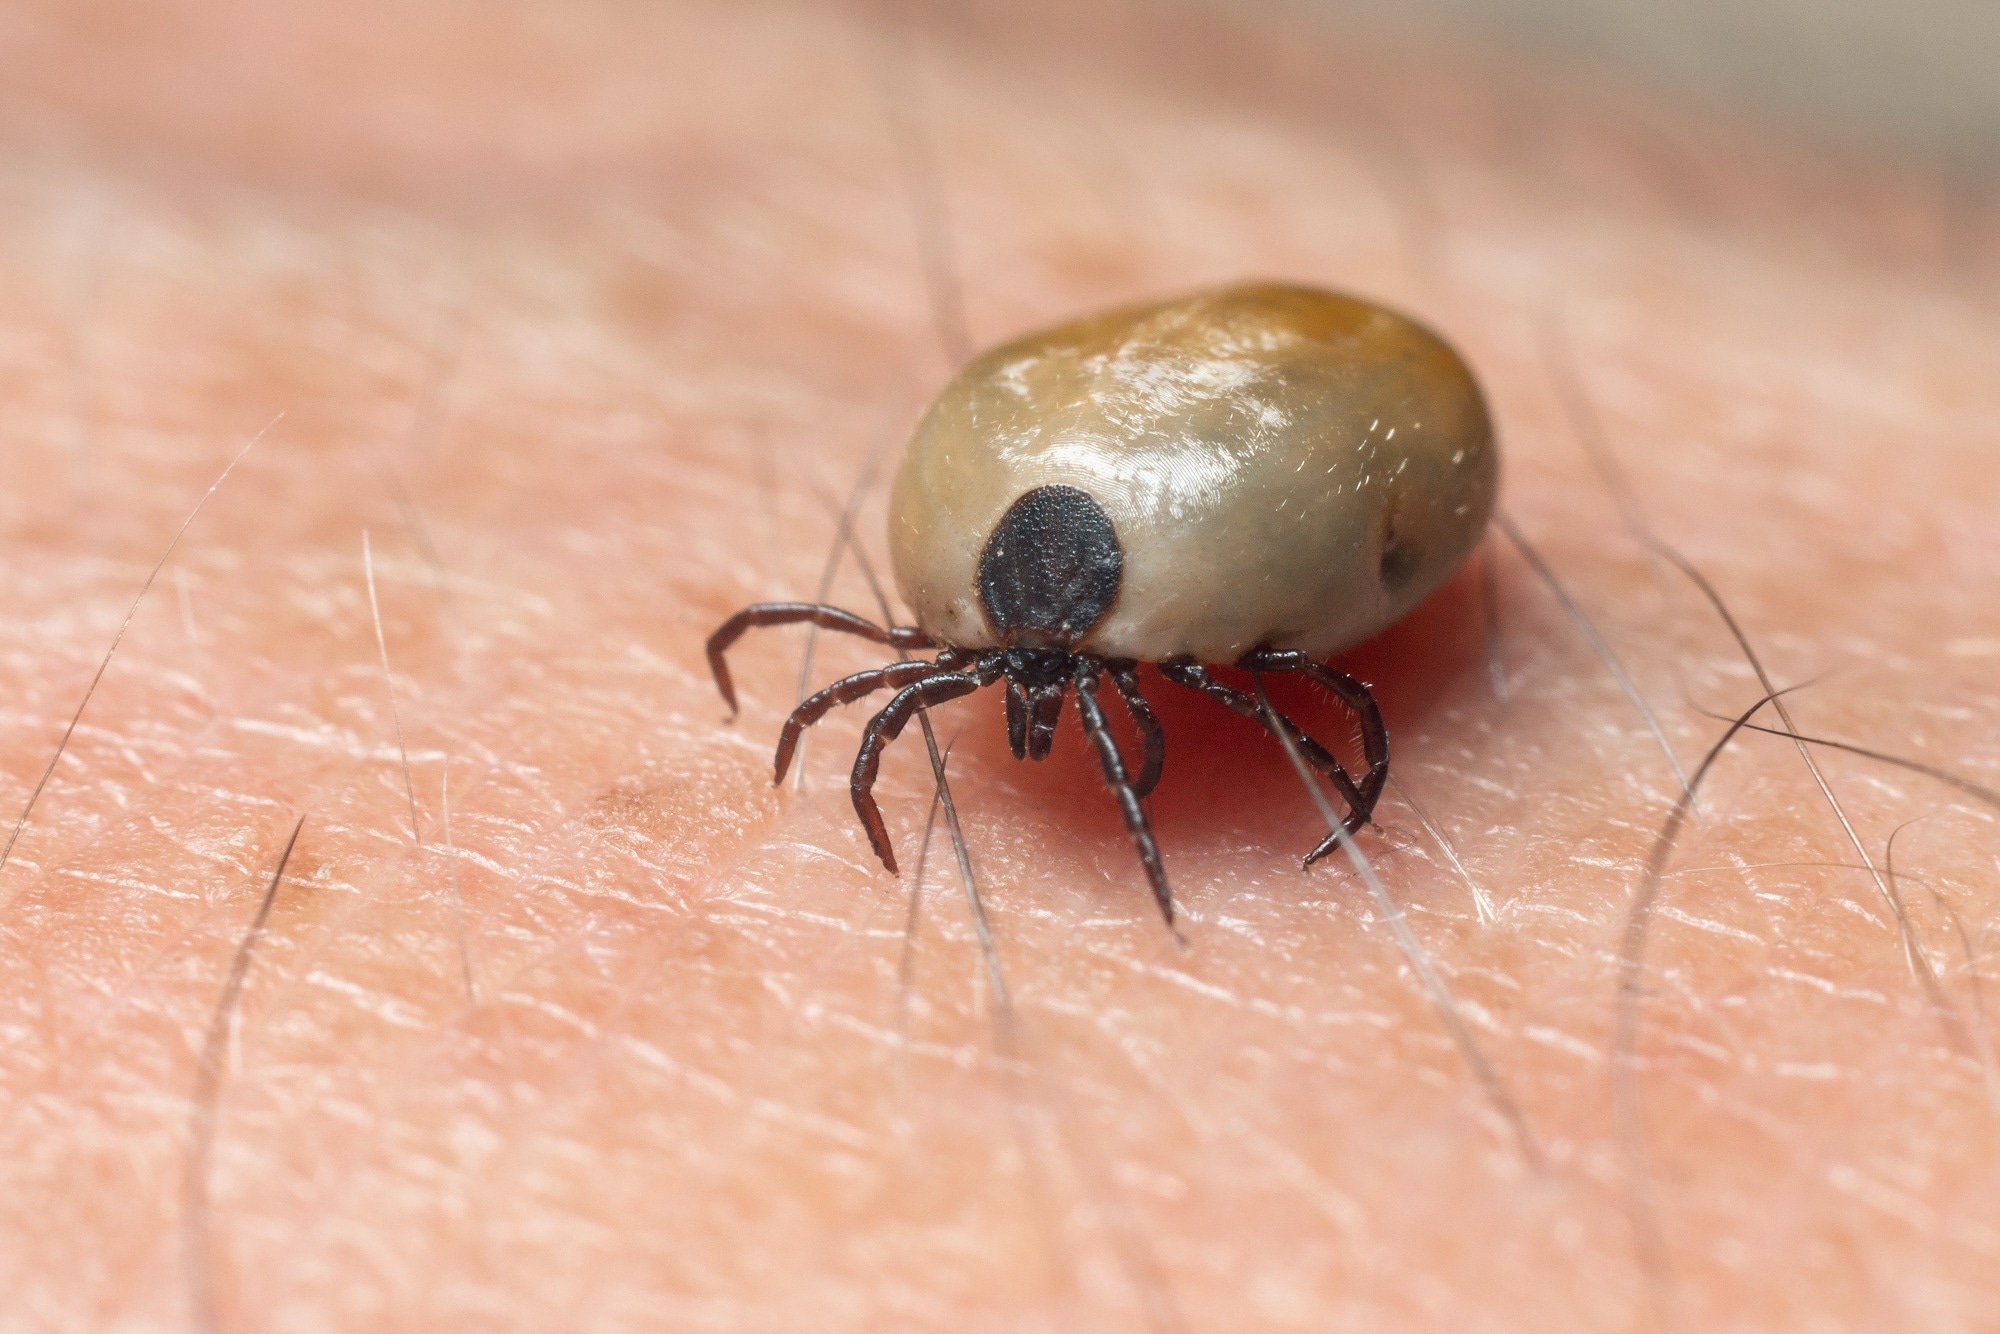 Synopsis: Bacterial Agents Detected in 418 Ticks Removed from Humans during 2014–2021, France. Image Credit: Afanasiev Andrii / Shutterstock